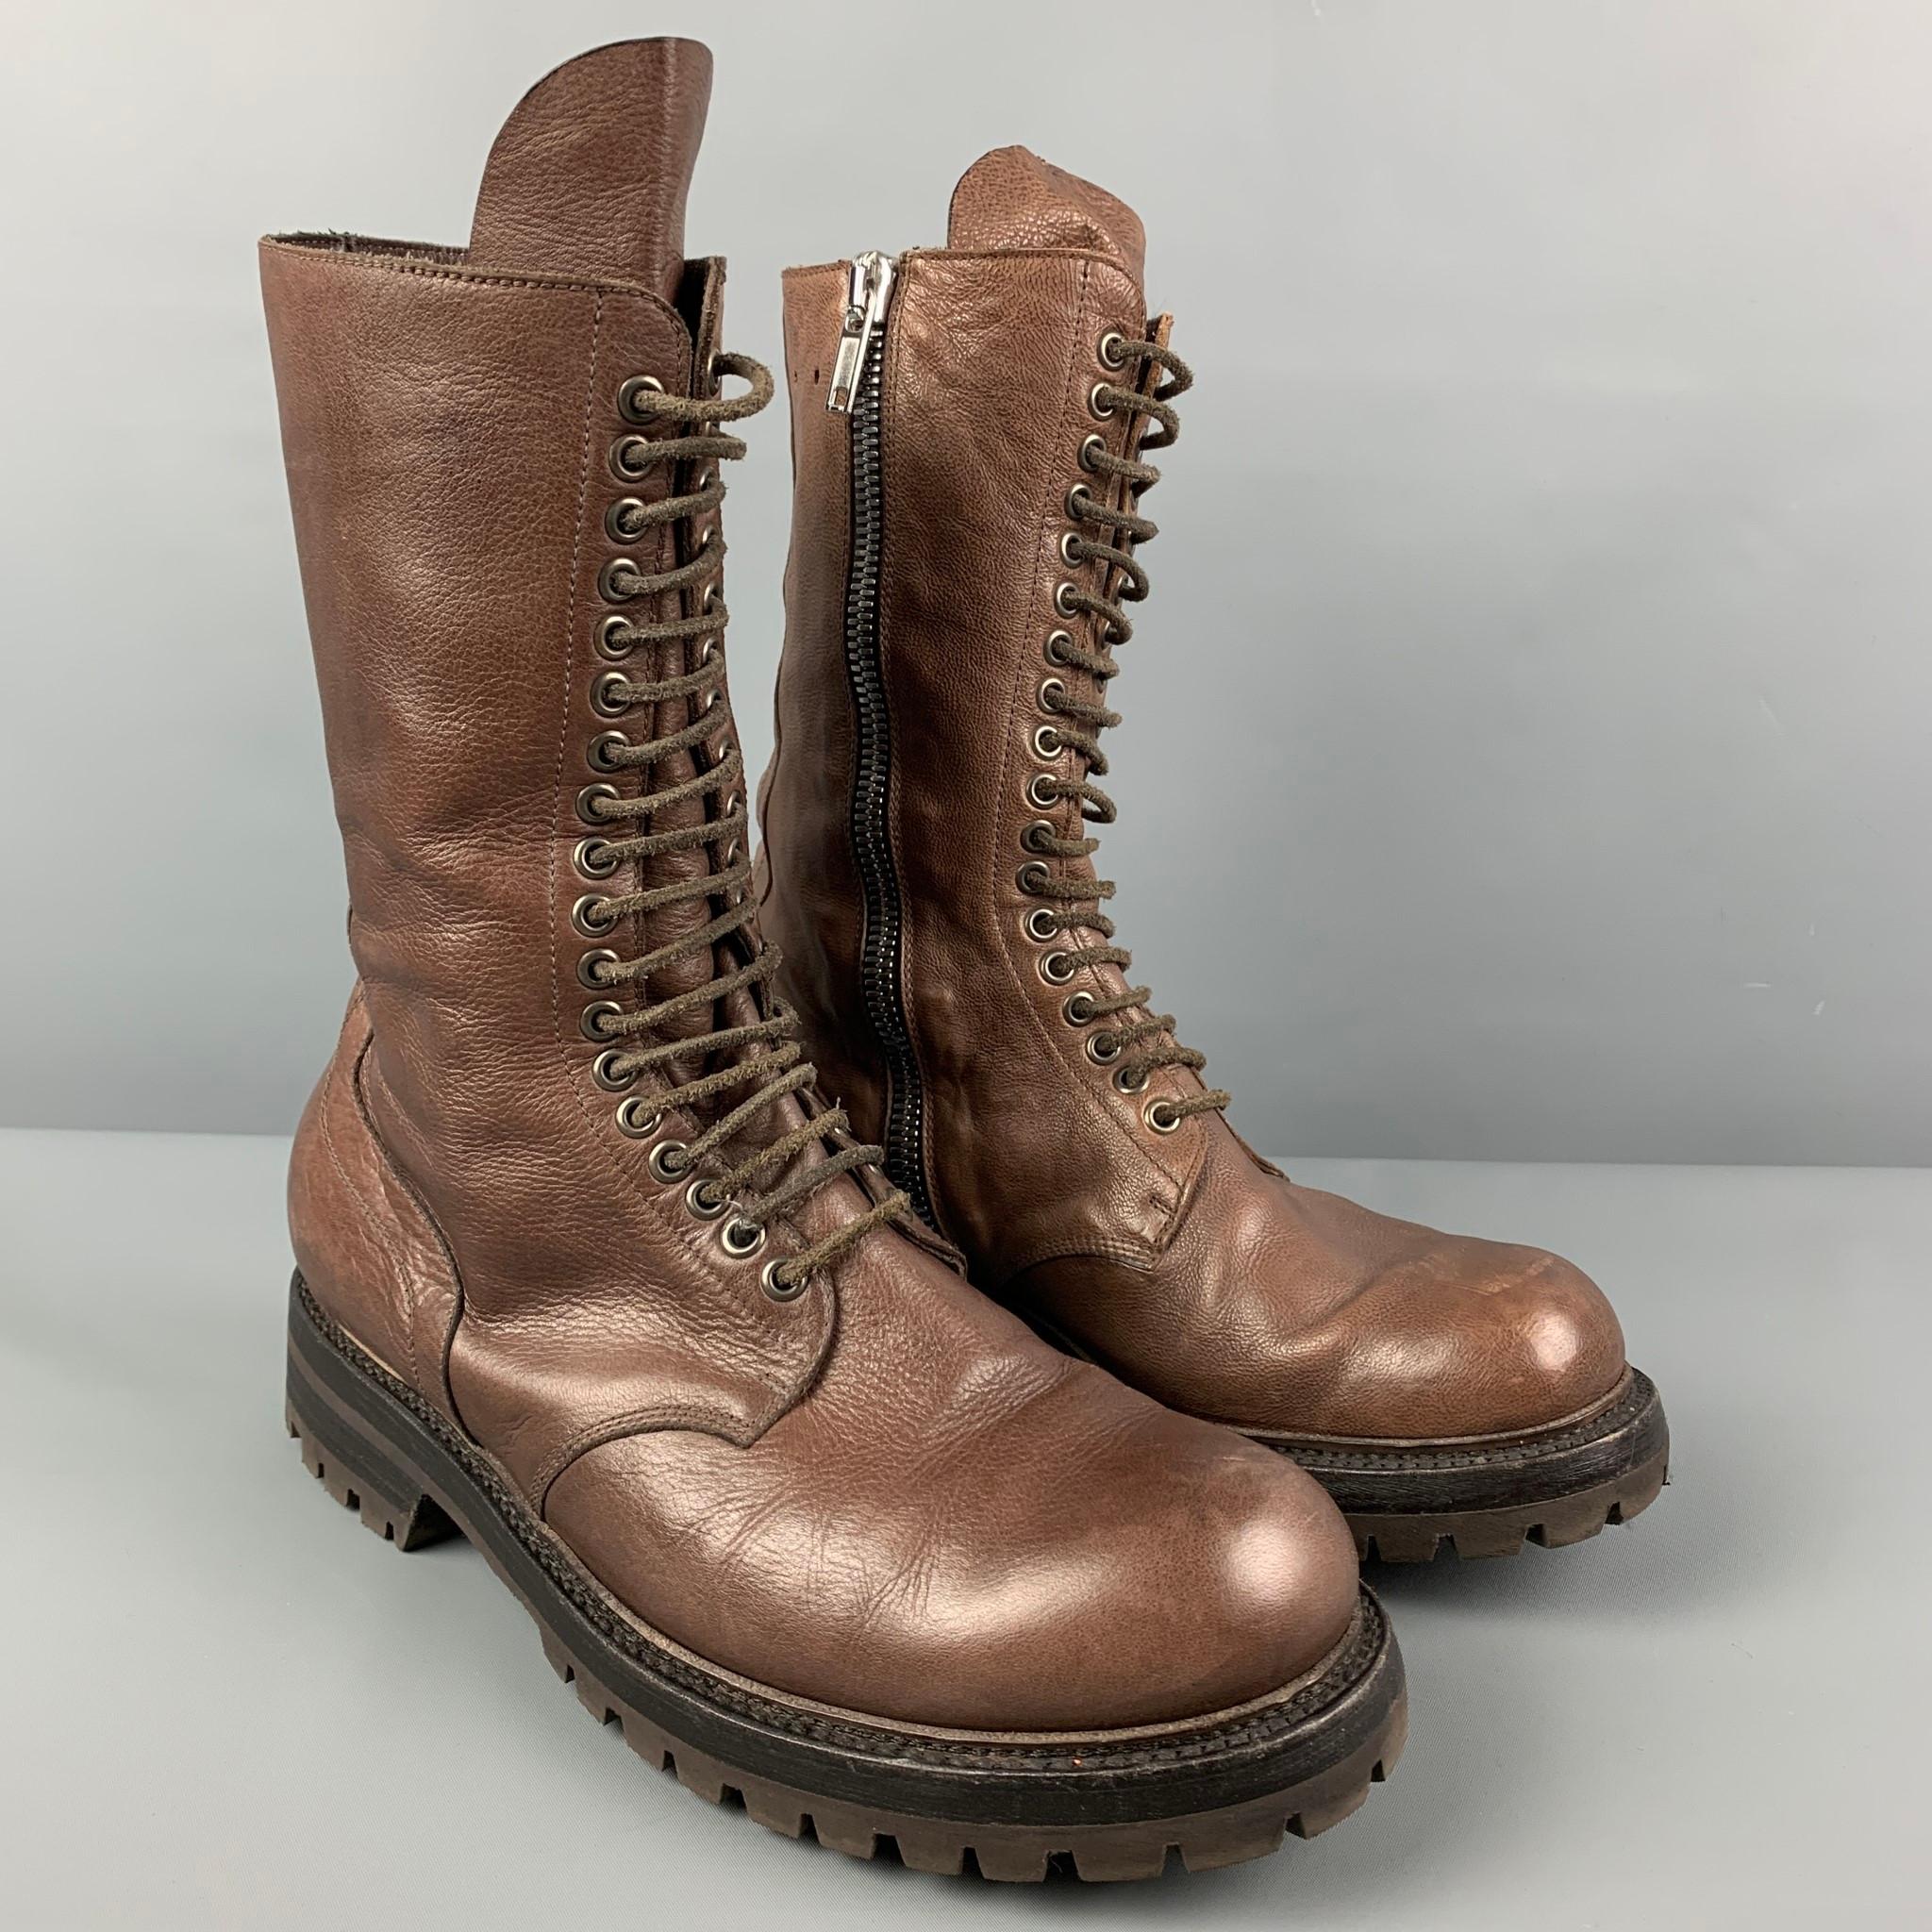 RICK OWENS boots comes in a brown leather featuring a military style, round toe, side zipper detail, and a lace up closure. Made in Italy. 

Good Pre-Owned Condition. Minor wear. As-Is.
Marked: 43
Original Retail Price: